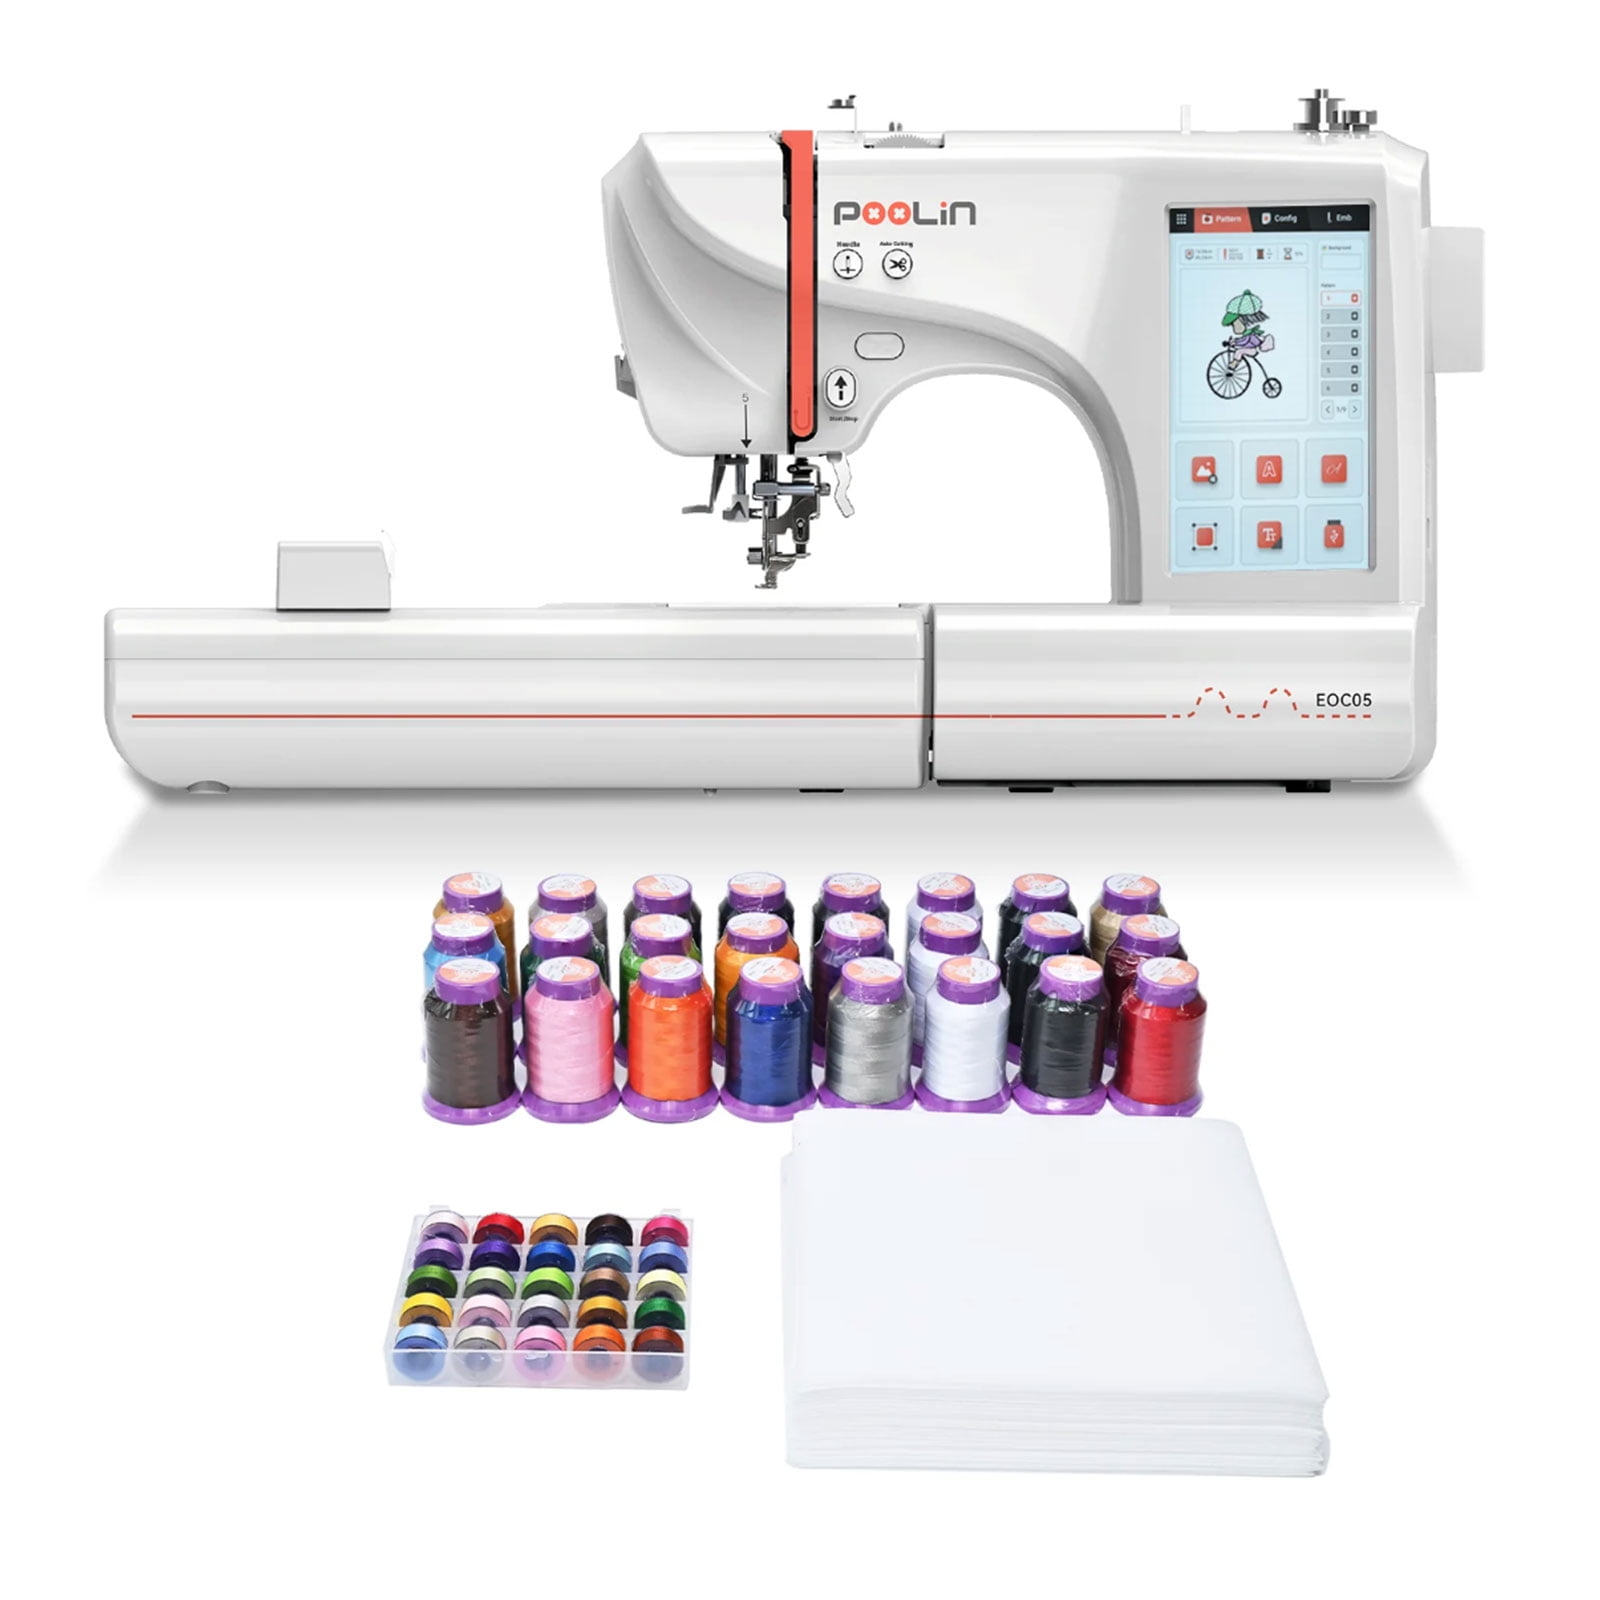  Brother Embroidery Machine, PE550D, 125 Built-in Designs  including 45 Disney Designs, 9 Font Styles, 4 x 4 Embroidery Area, Large  3.2 LCD Touchscreen, USB Port